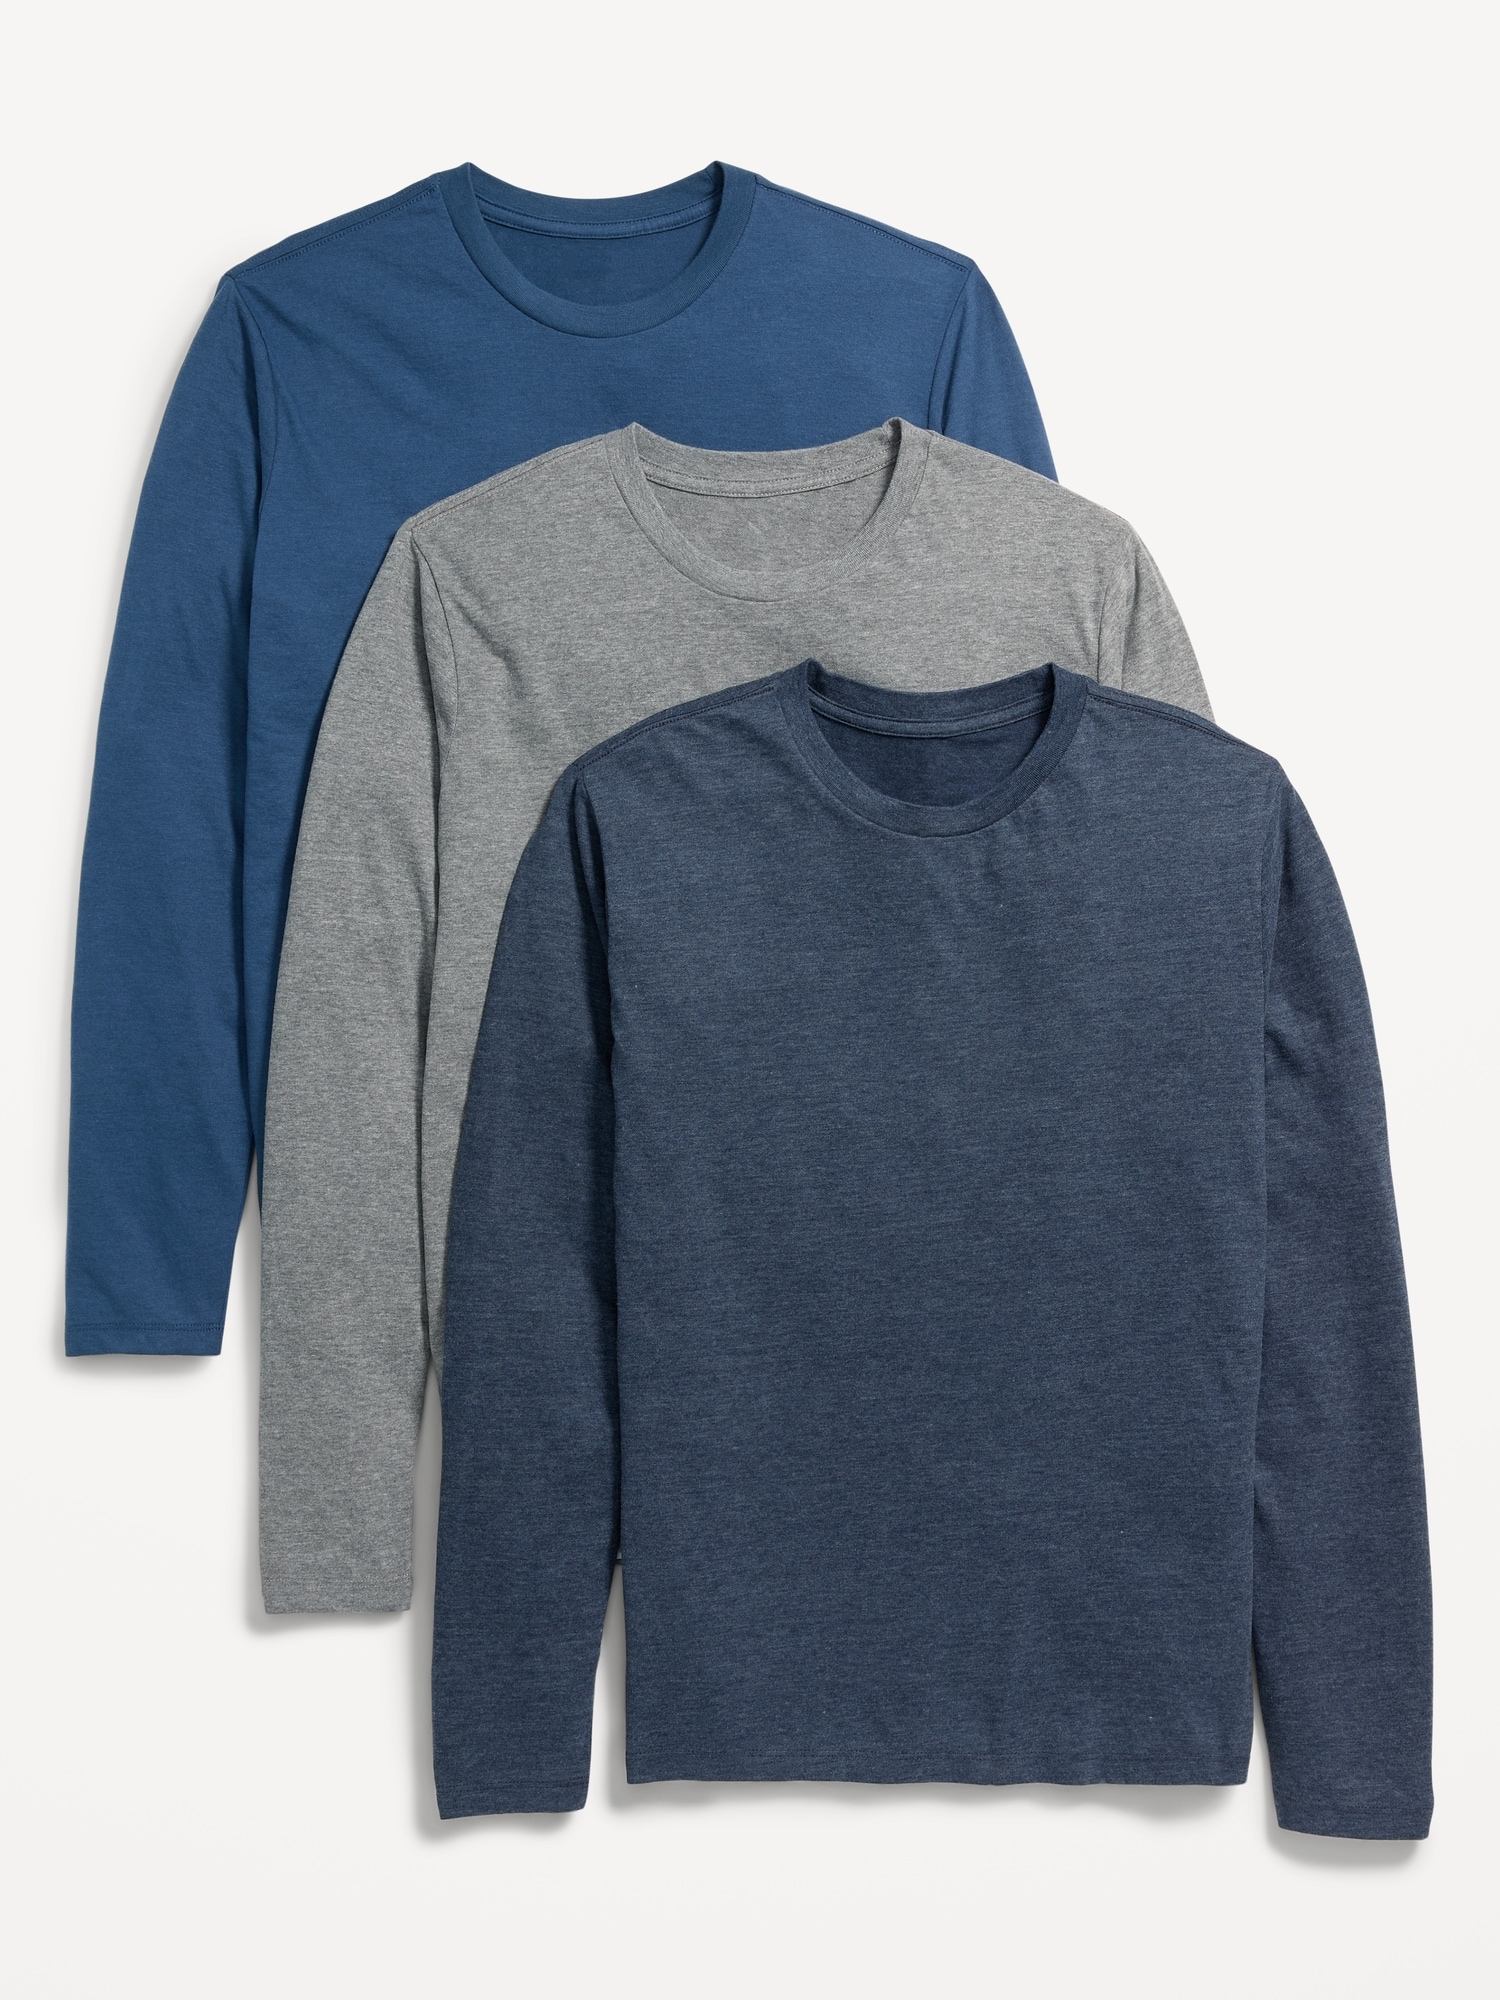 Soft-Washed Long-Sleeve T-Shirt 3-Pack for Men